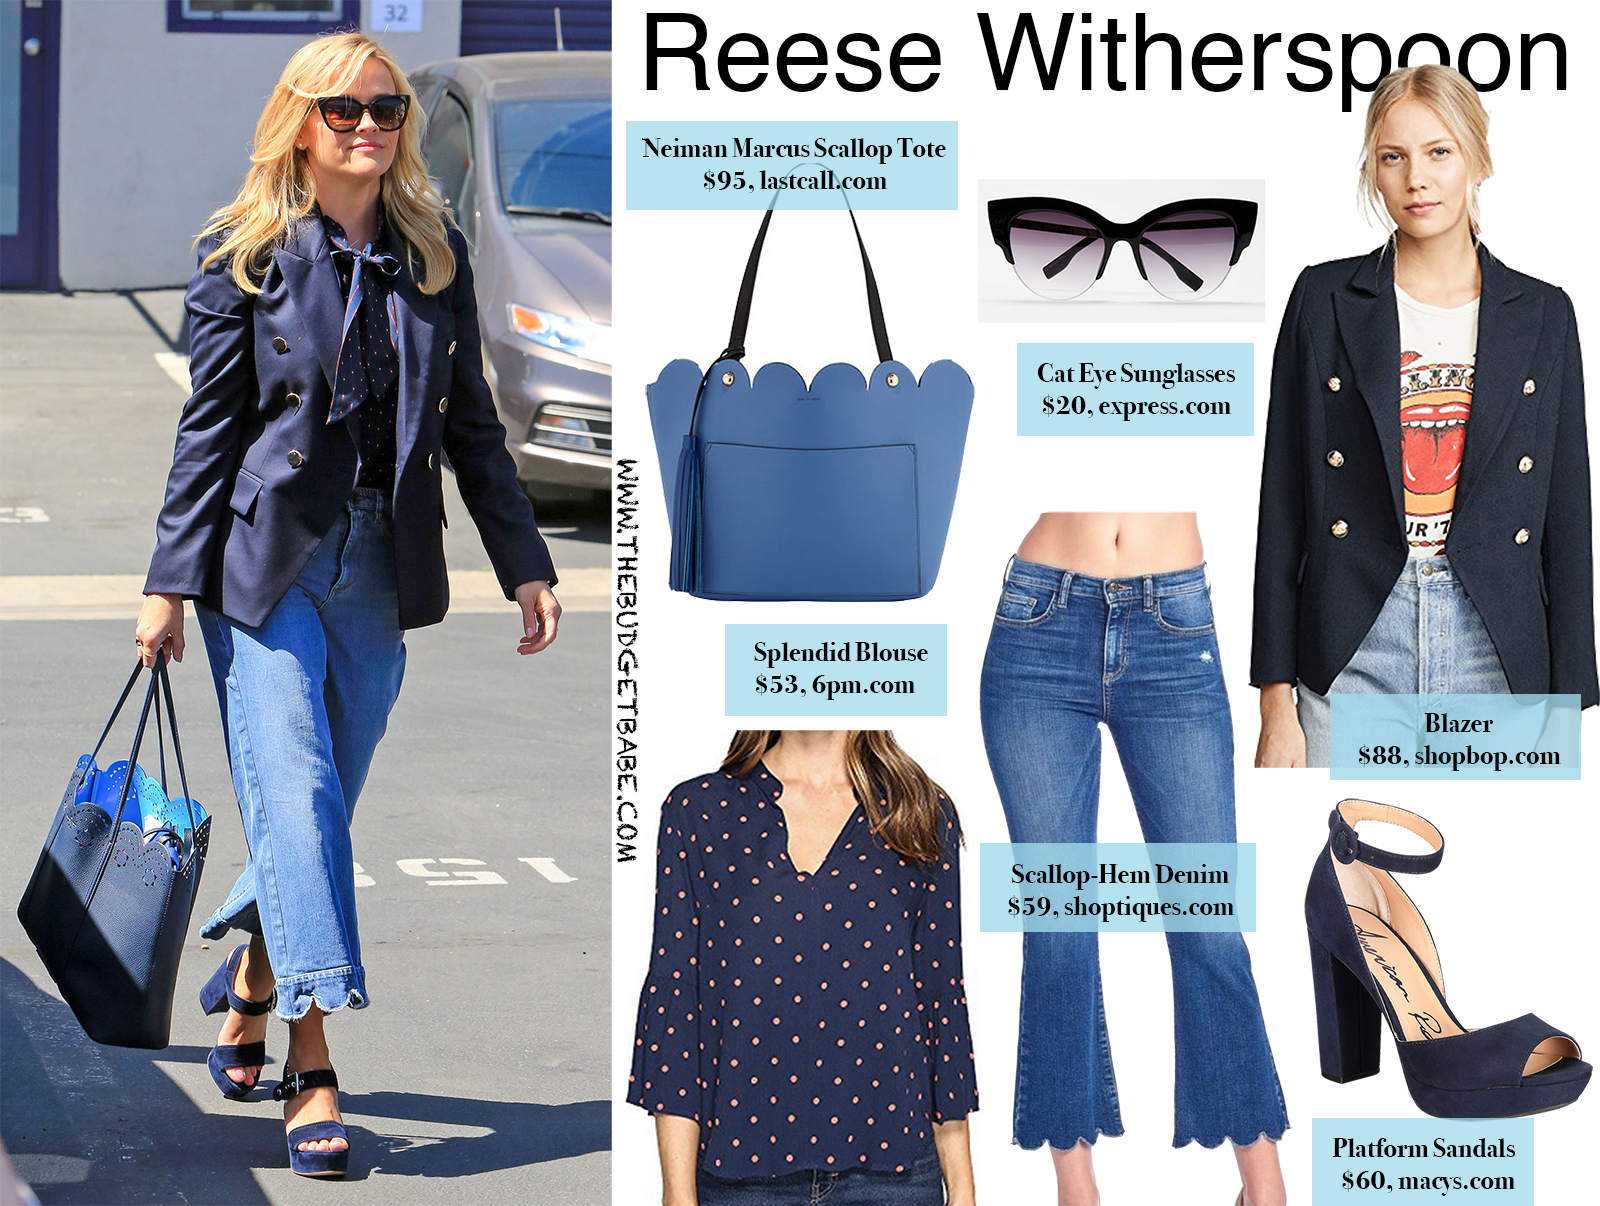 Reese Witherspoon's Scallop-Hem Jeans & Blazer